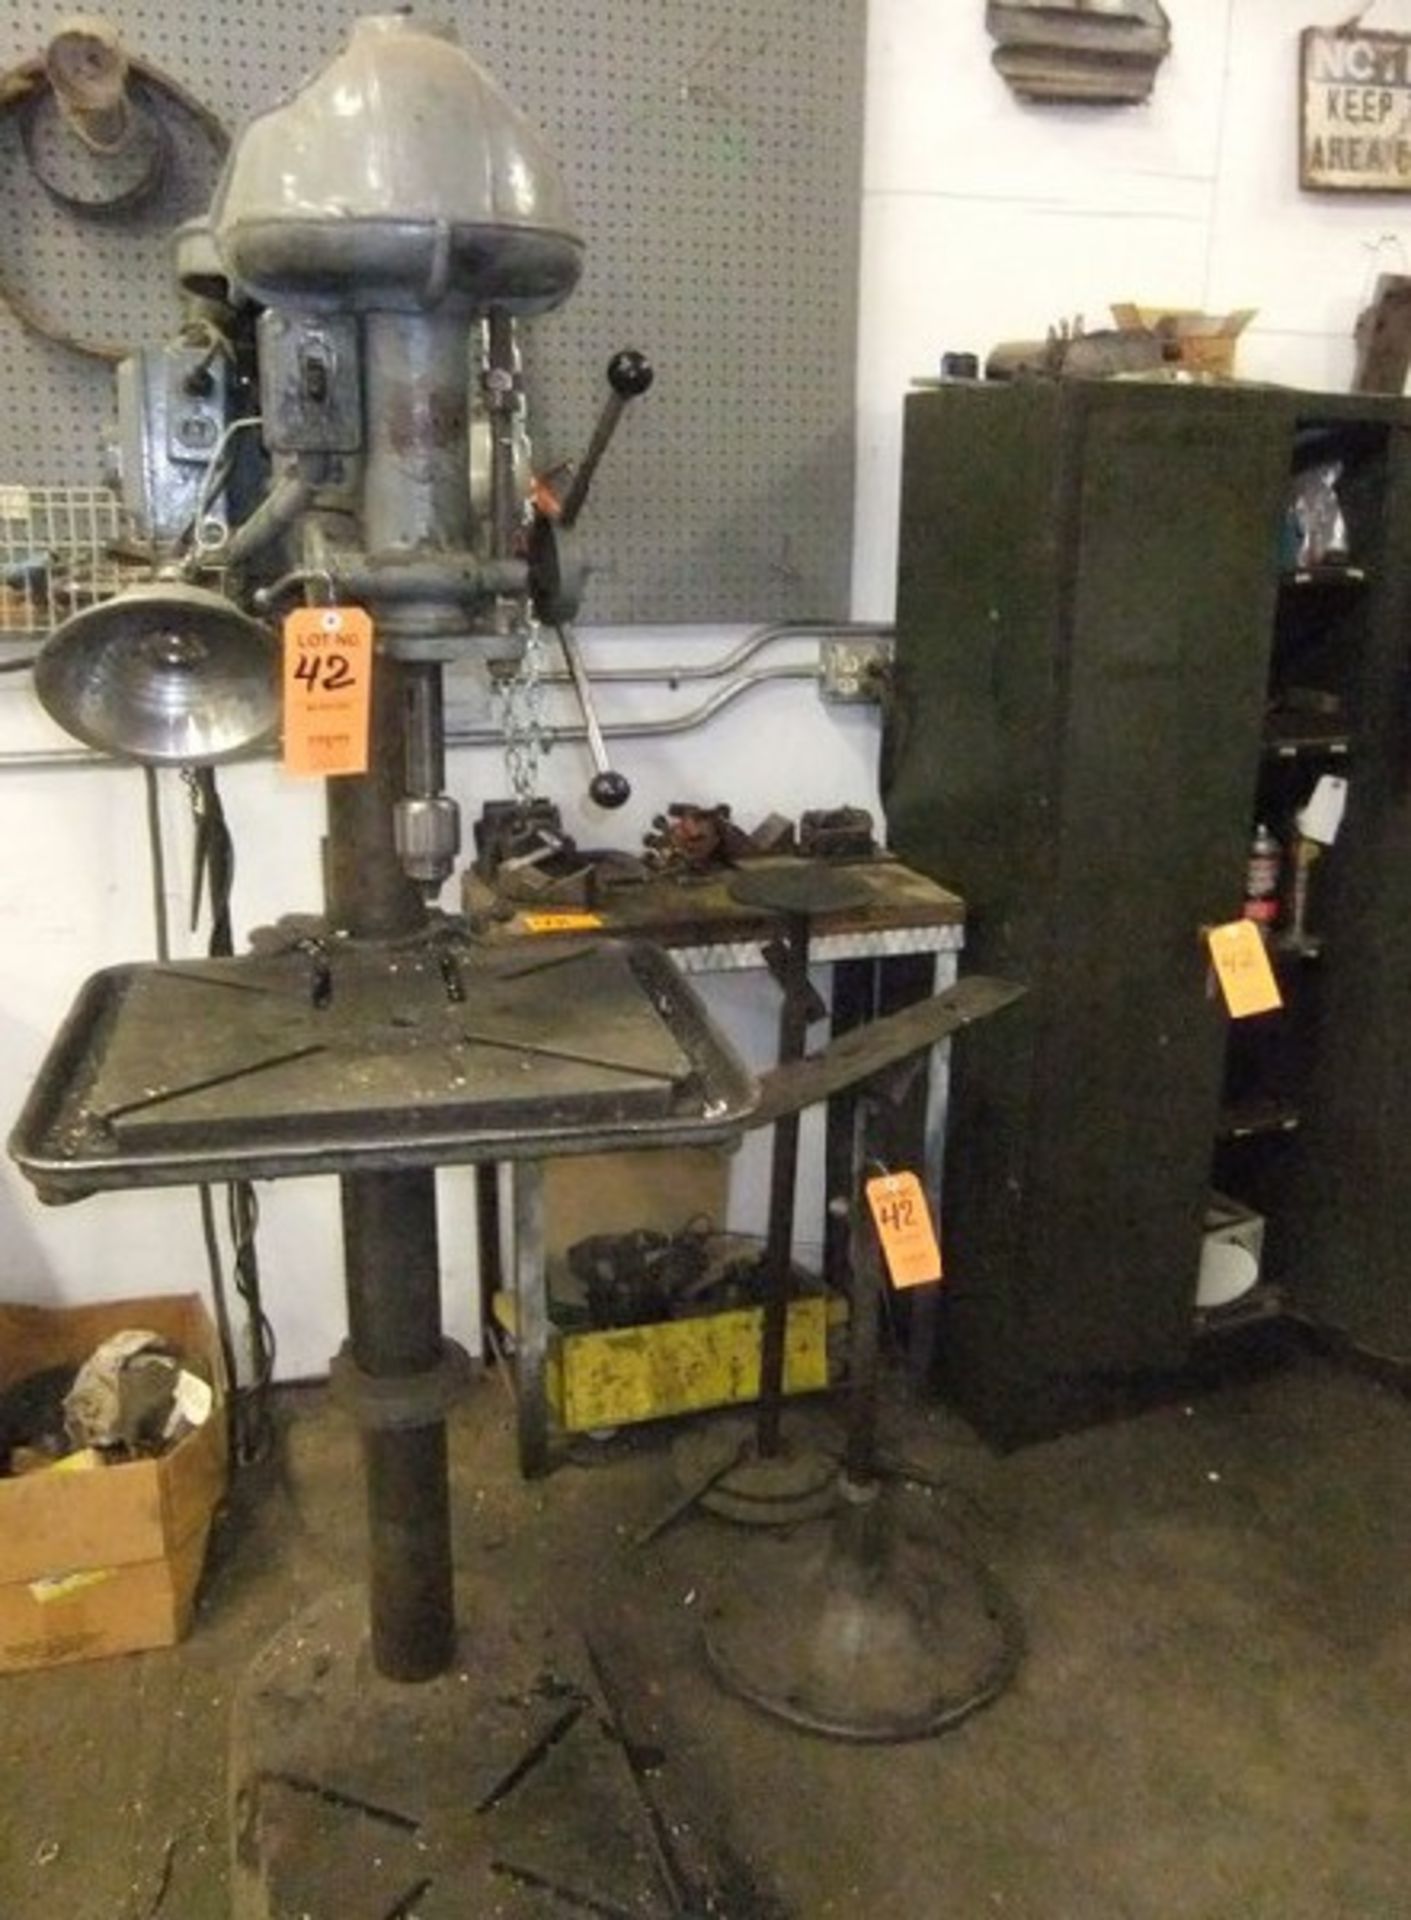 LOT: WALKER TURNER 1/2" DRILL PRESS W/ (2) WORKSTANDS; TABLE & CONTENTS